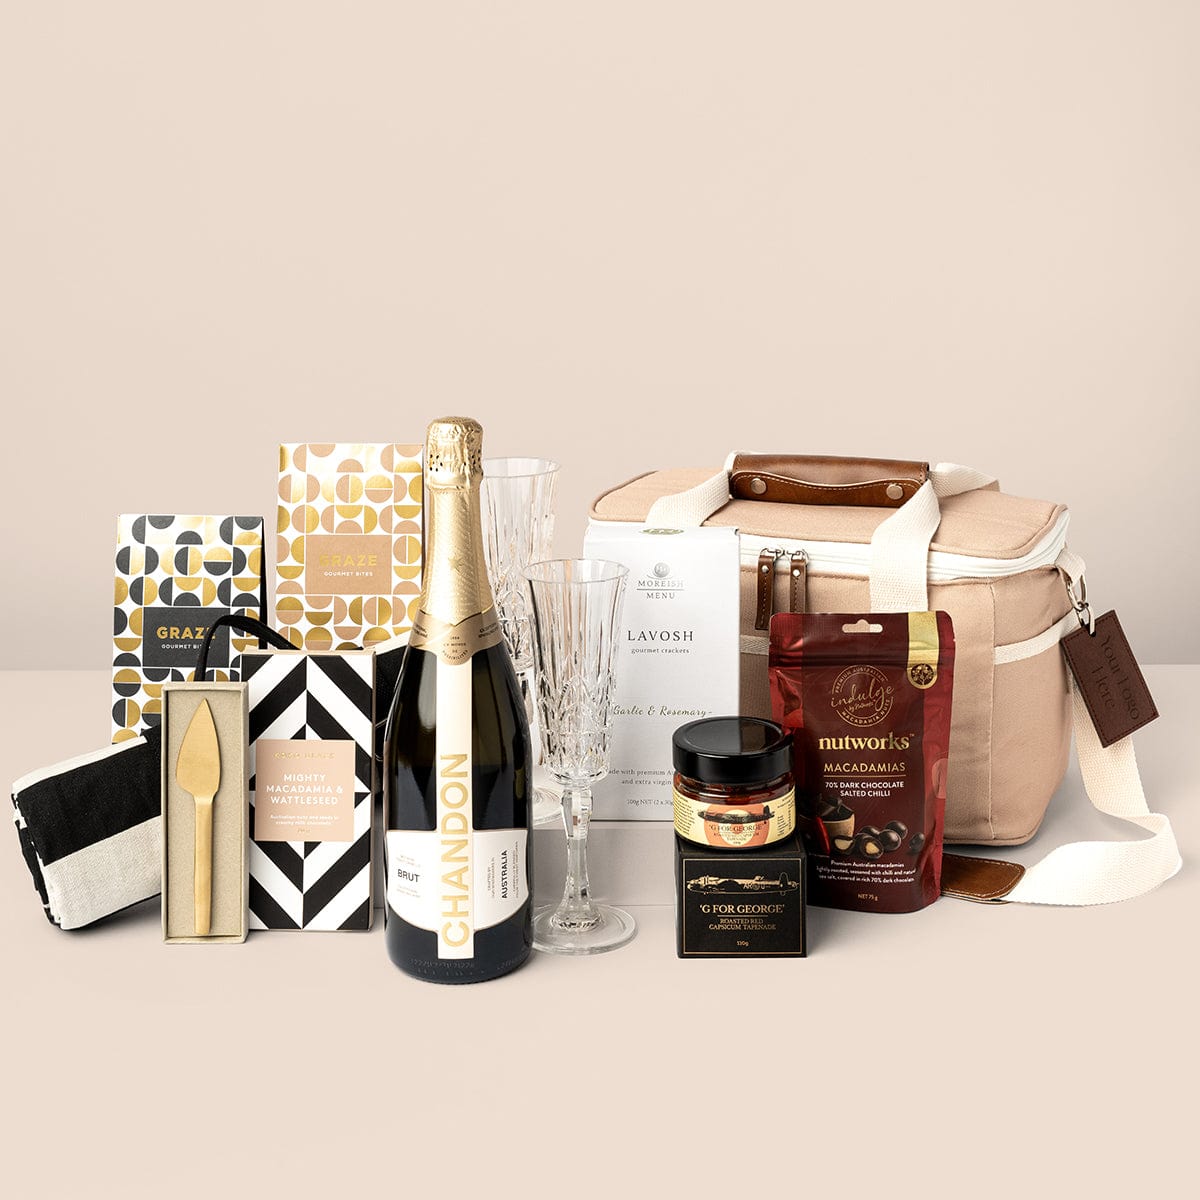 Taupe cooler bag gift with Chandon, a striped picnic rug, brass gold cheese knife, acrylic etched champagne flutes, graze gourmet bites, koko black chocolate bar, capsicum tapenade, nutworks macadamias and lavosh crackers.  